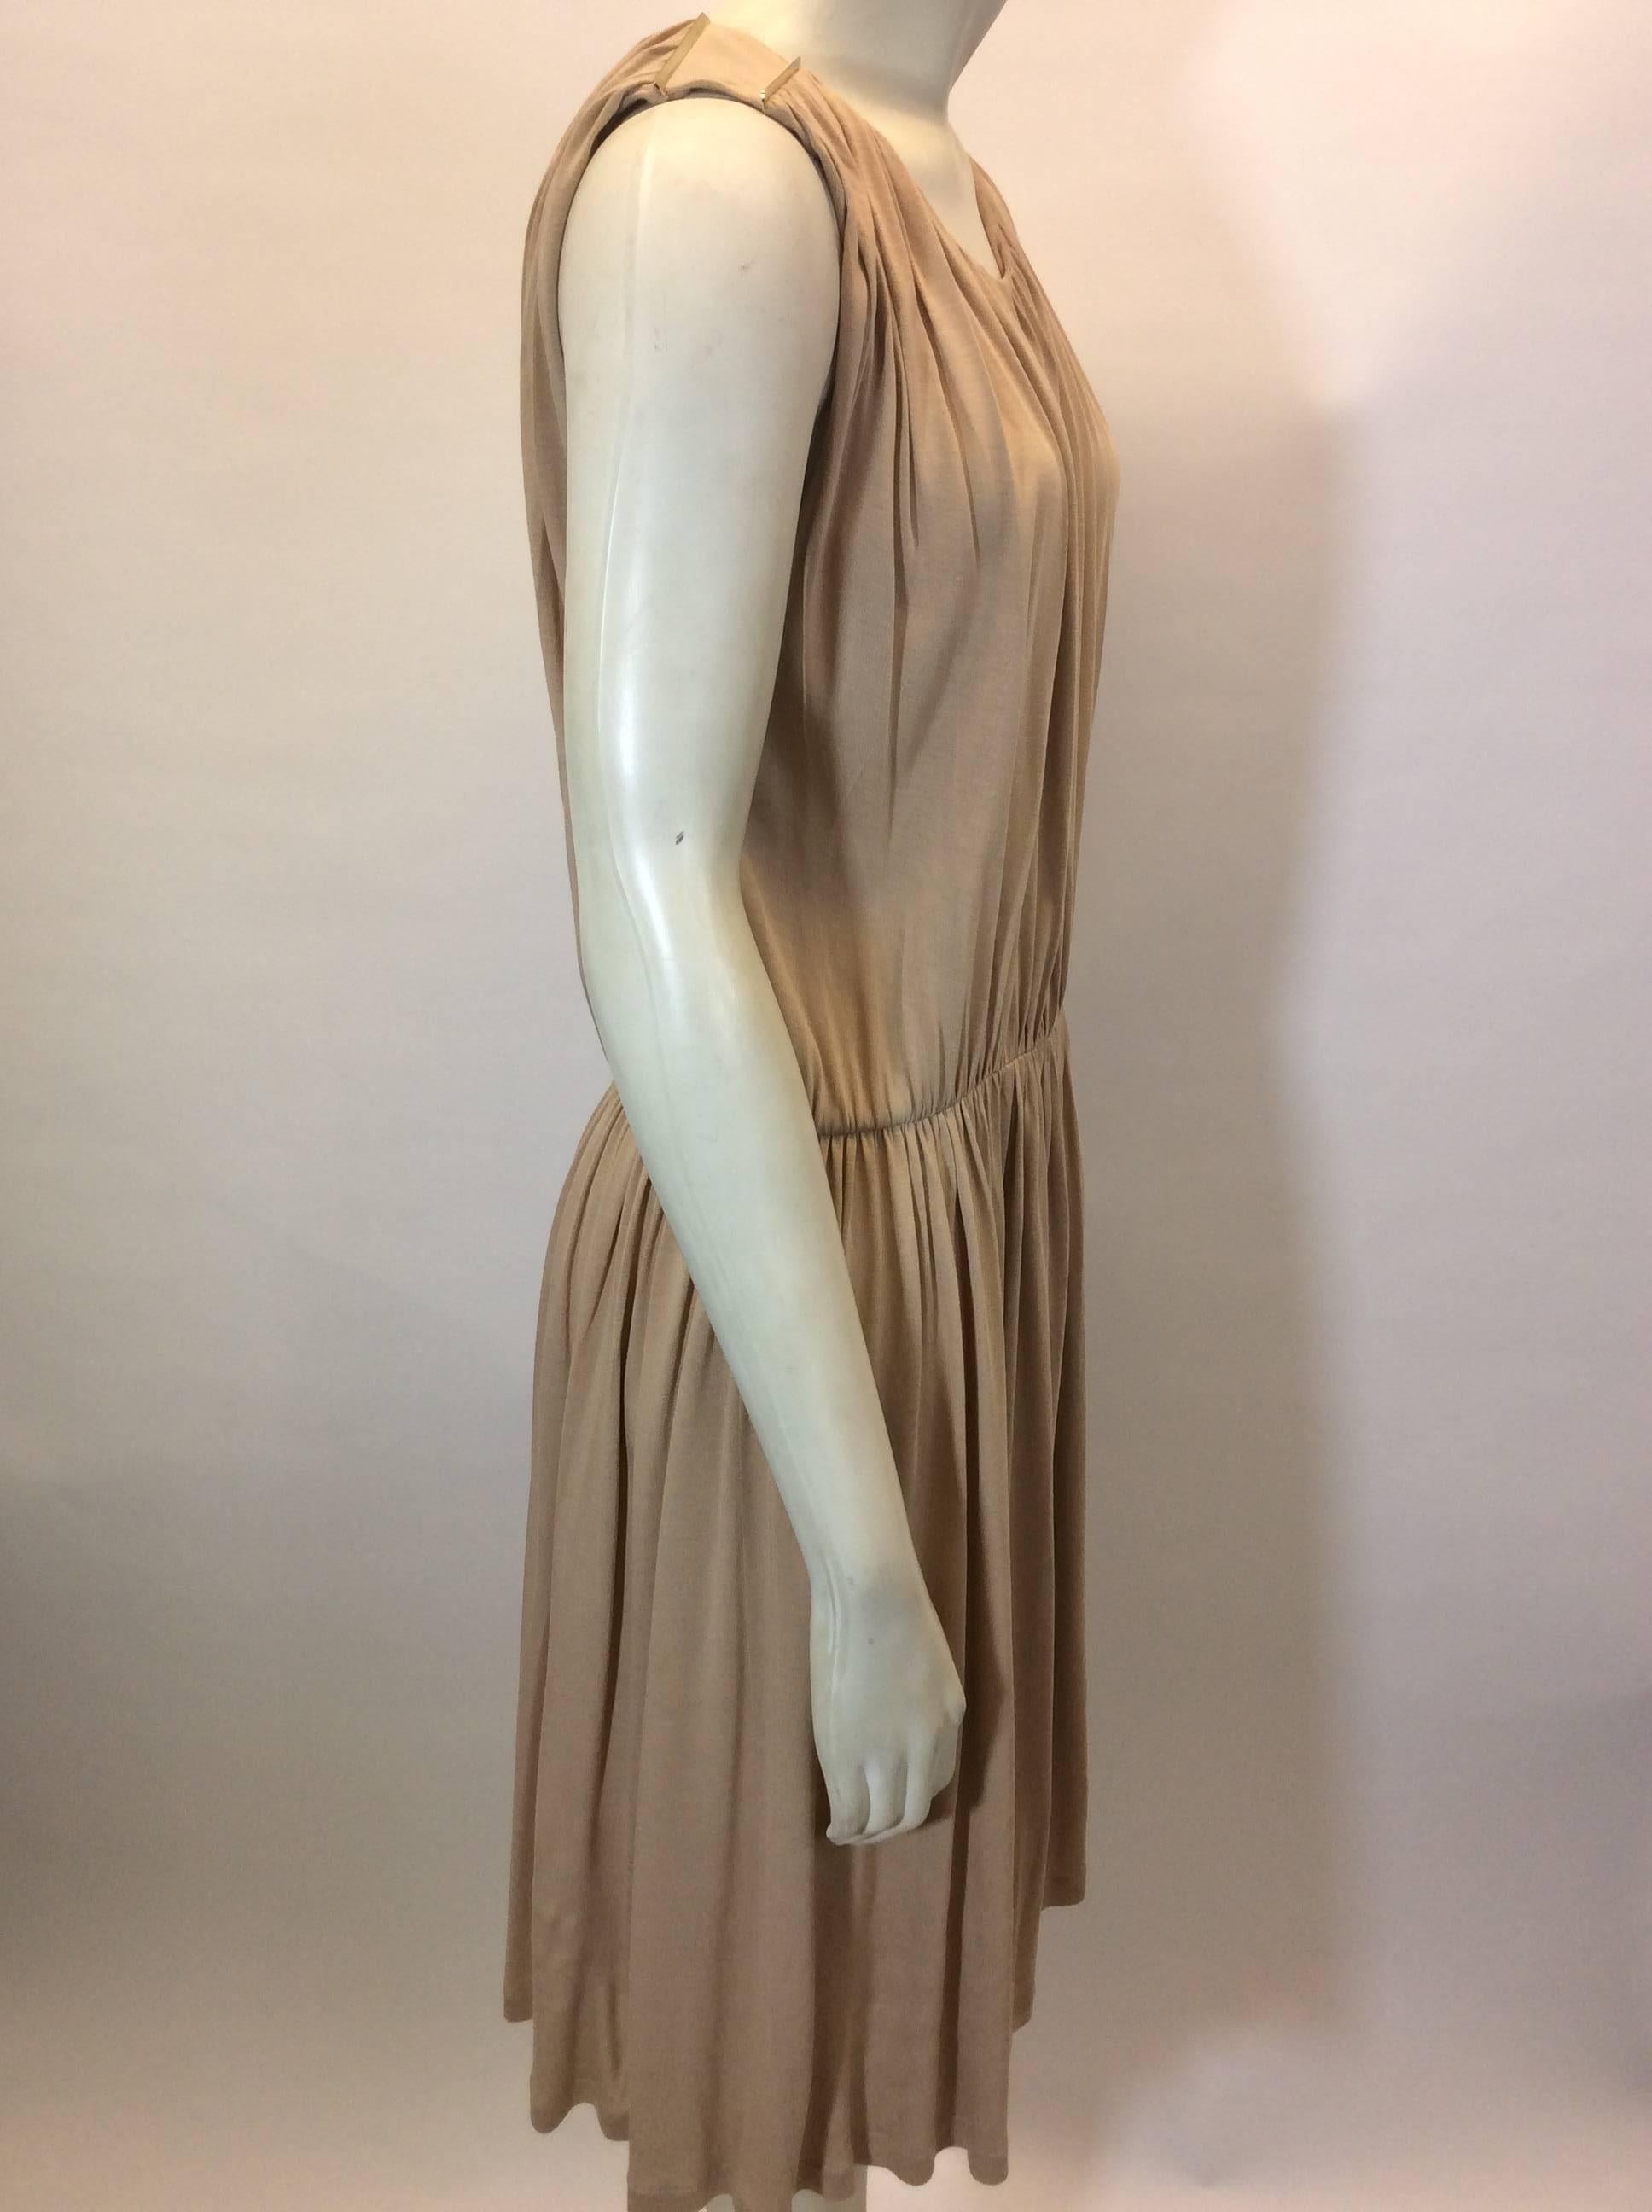 Taupe Longline Romper with Open Back
Features gold stripe detail on shoulder
Ruched design with elastic waist
Size Small
100% Viscose